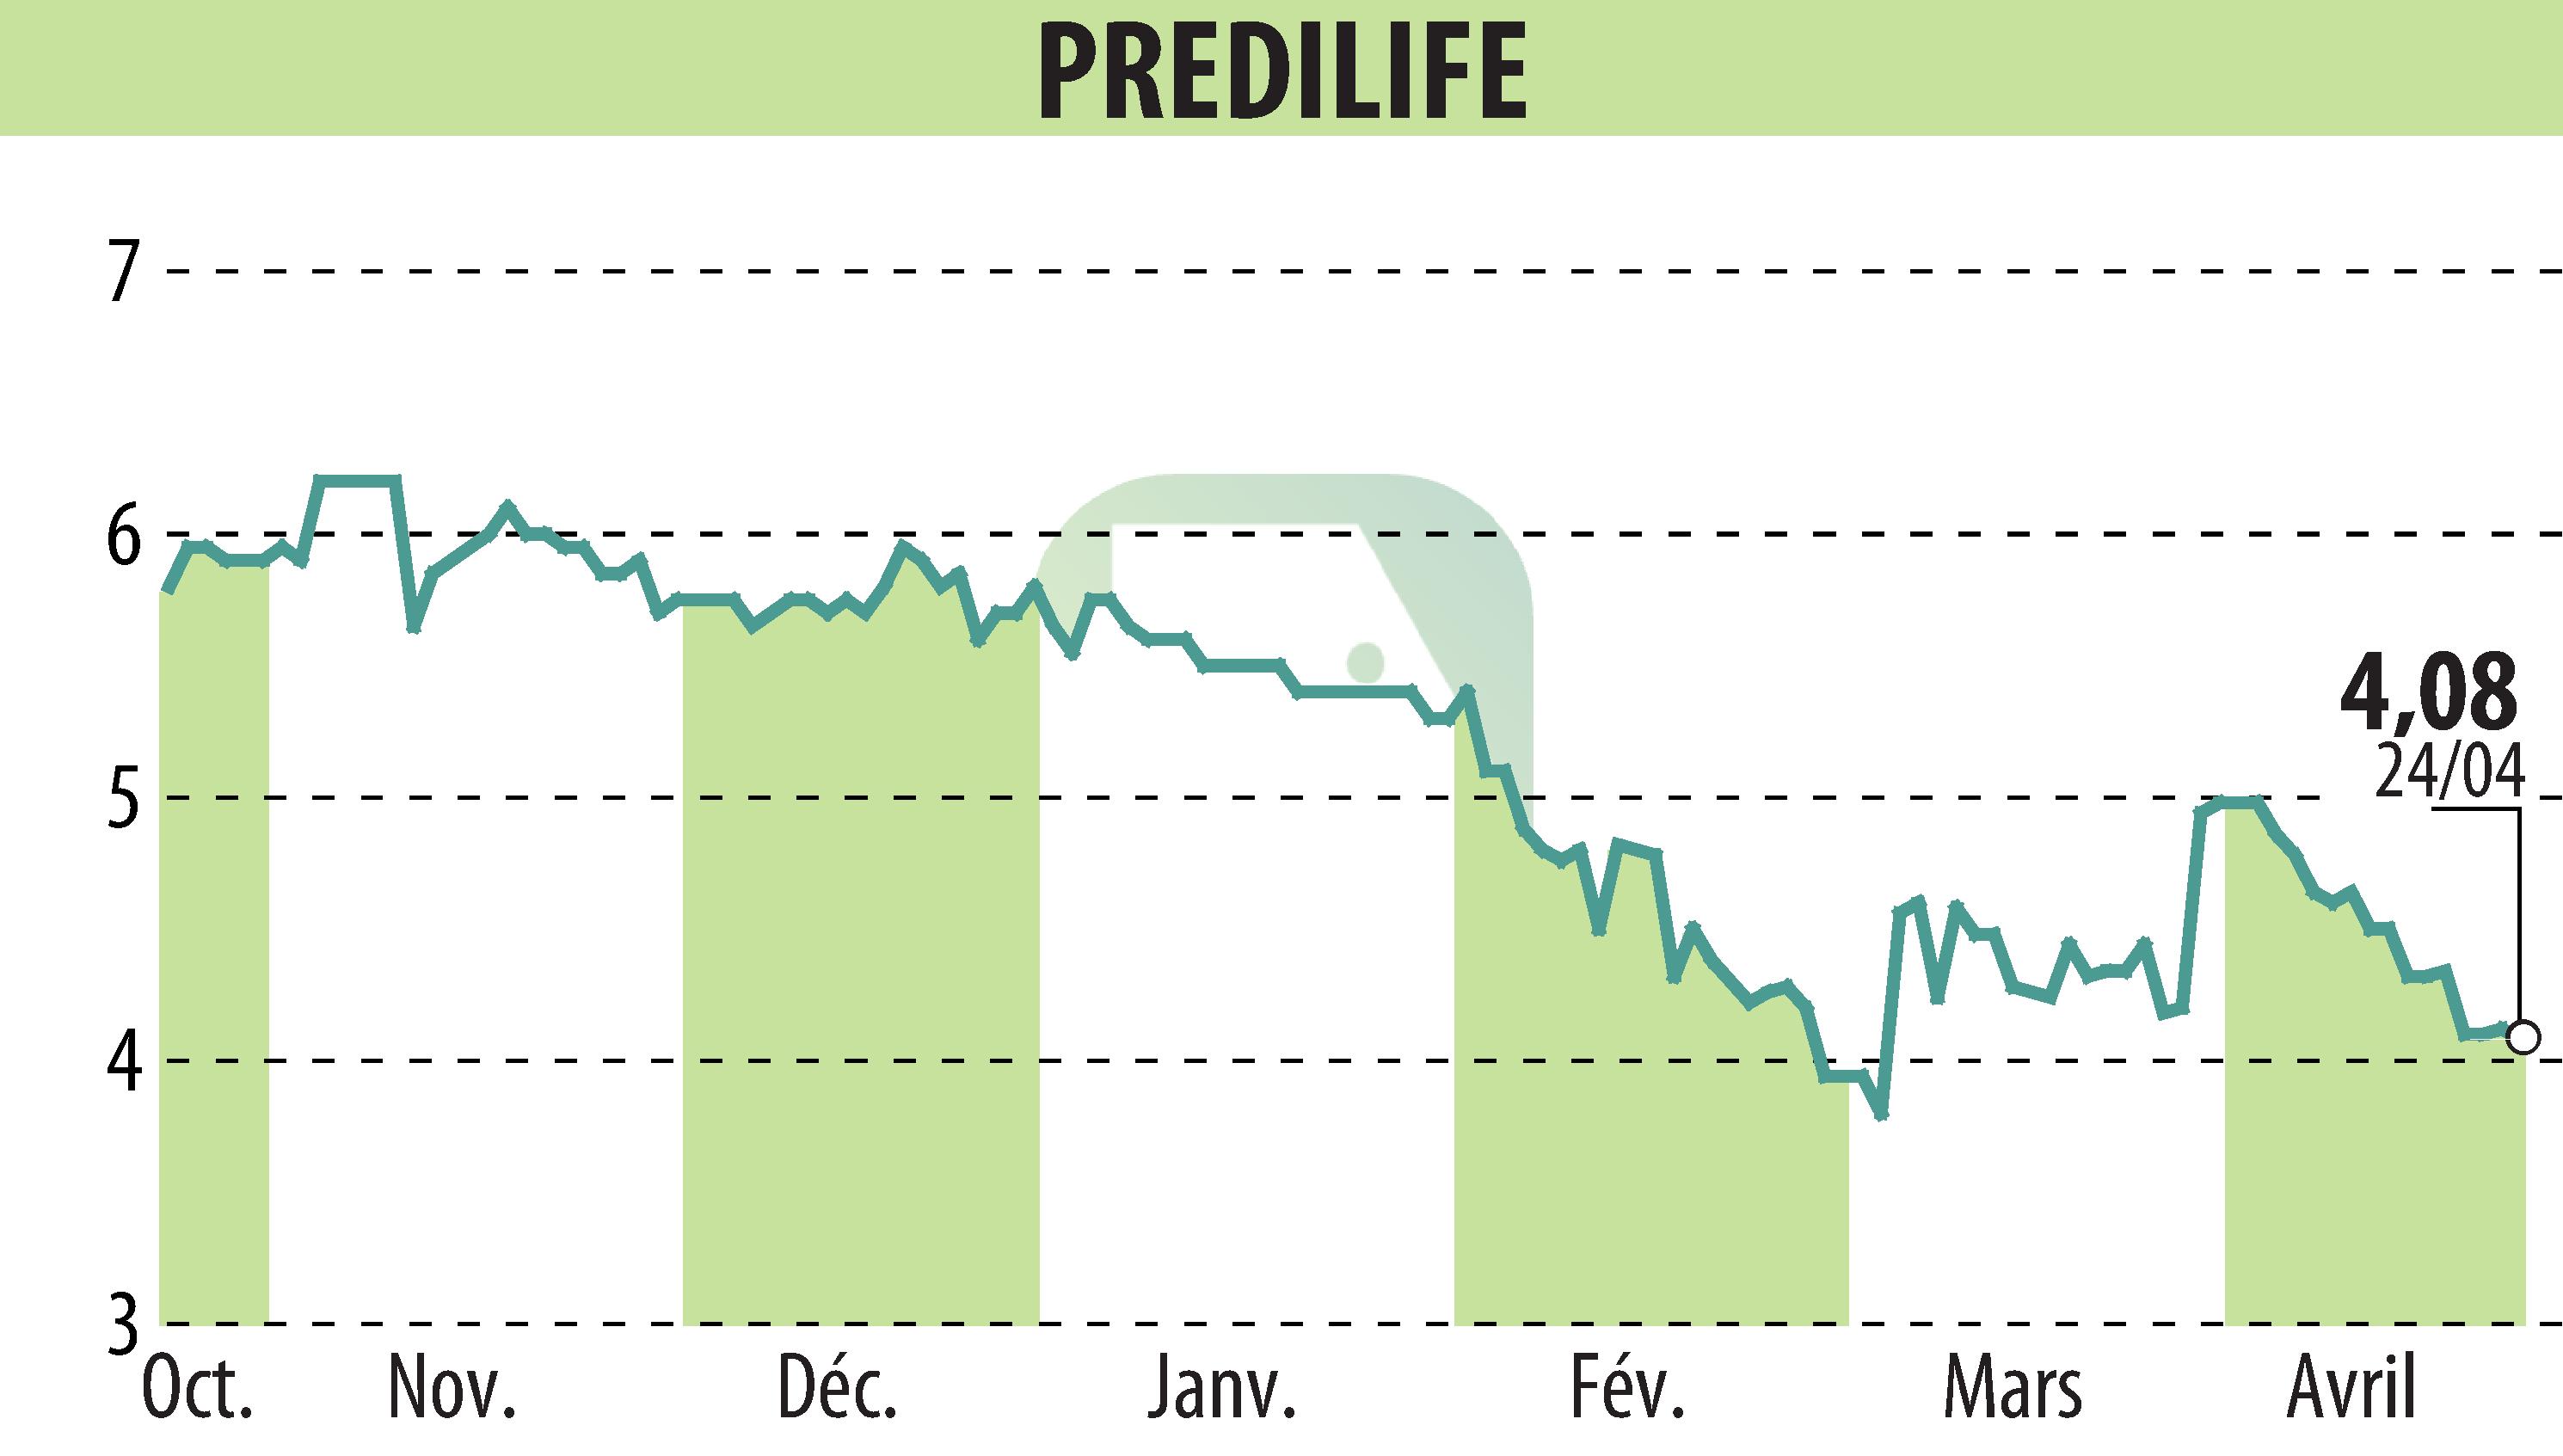 Stock price chart of PREDILIFE (EPA:ALPRE) showing fluctuations.